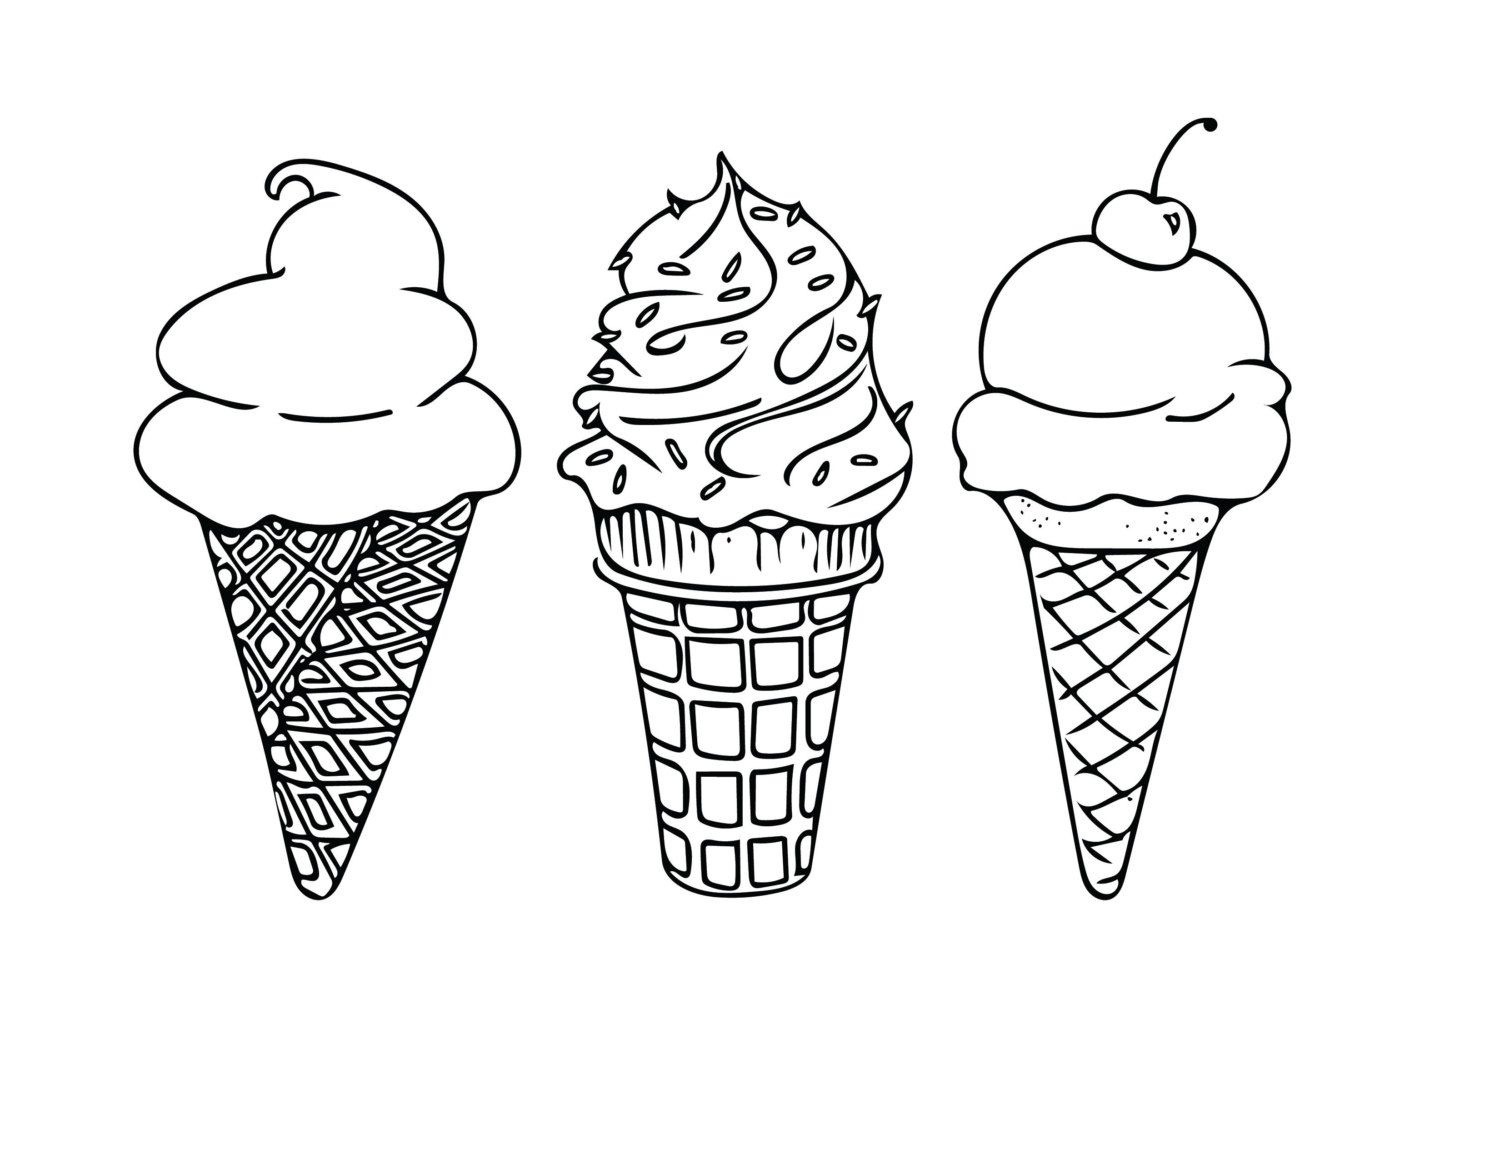 Cool Ice Cream Coloring Pages Ideas | Coloring Pages For Kids | Ice - Ice Cream Cone Template Free Printable